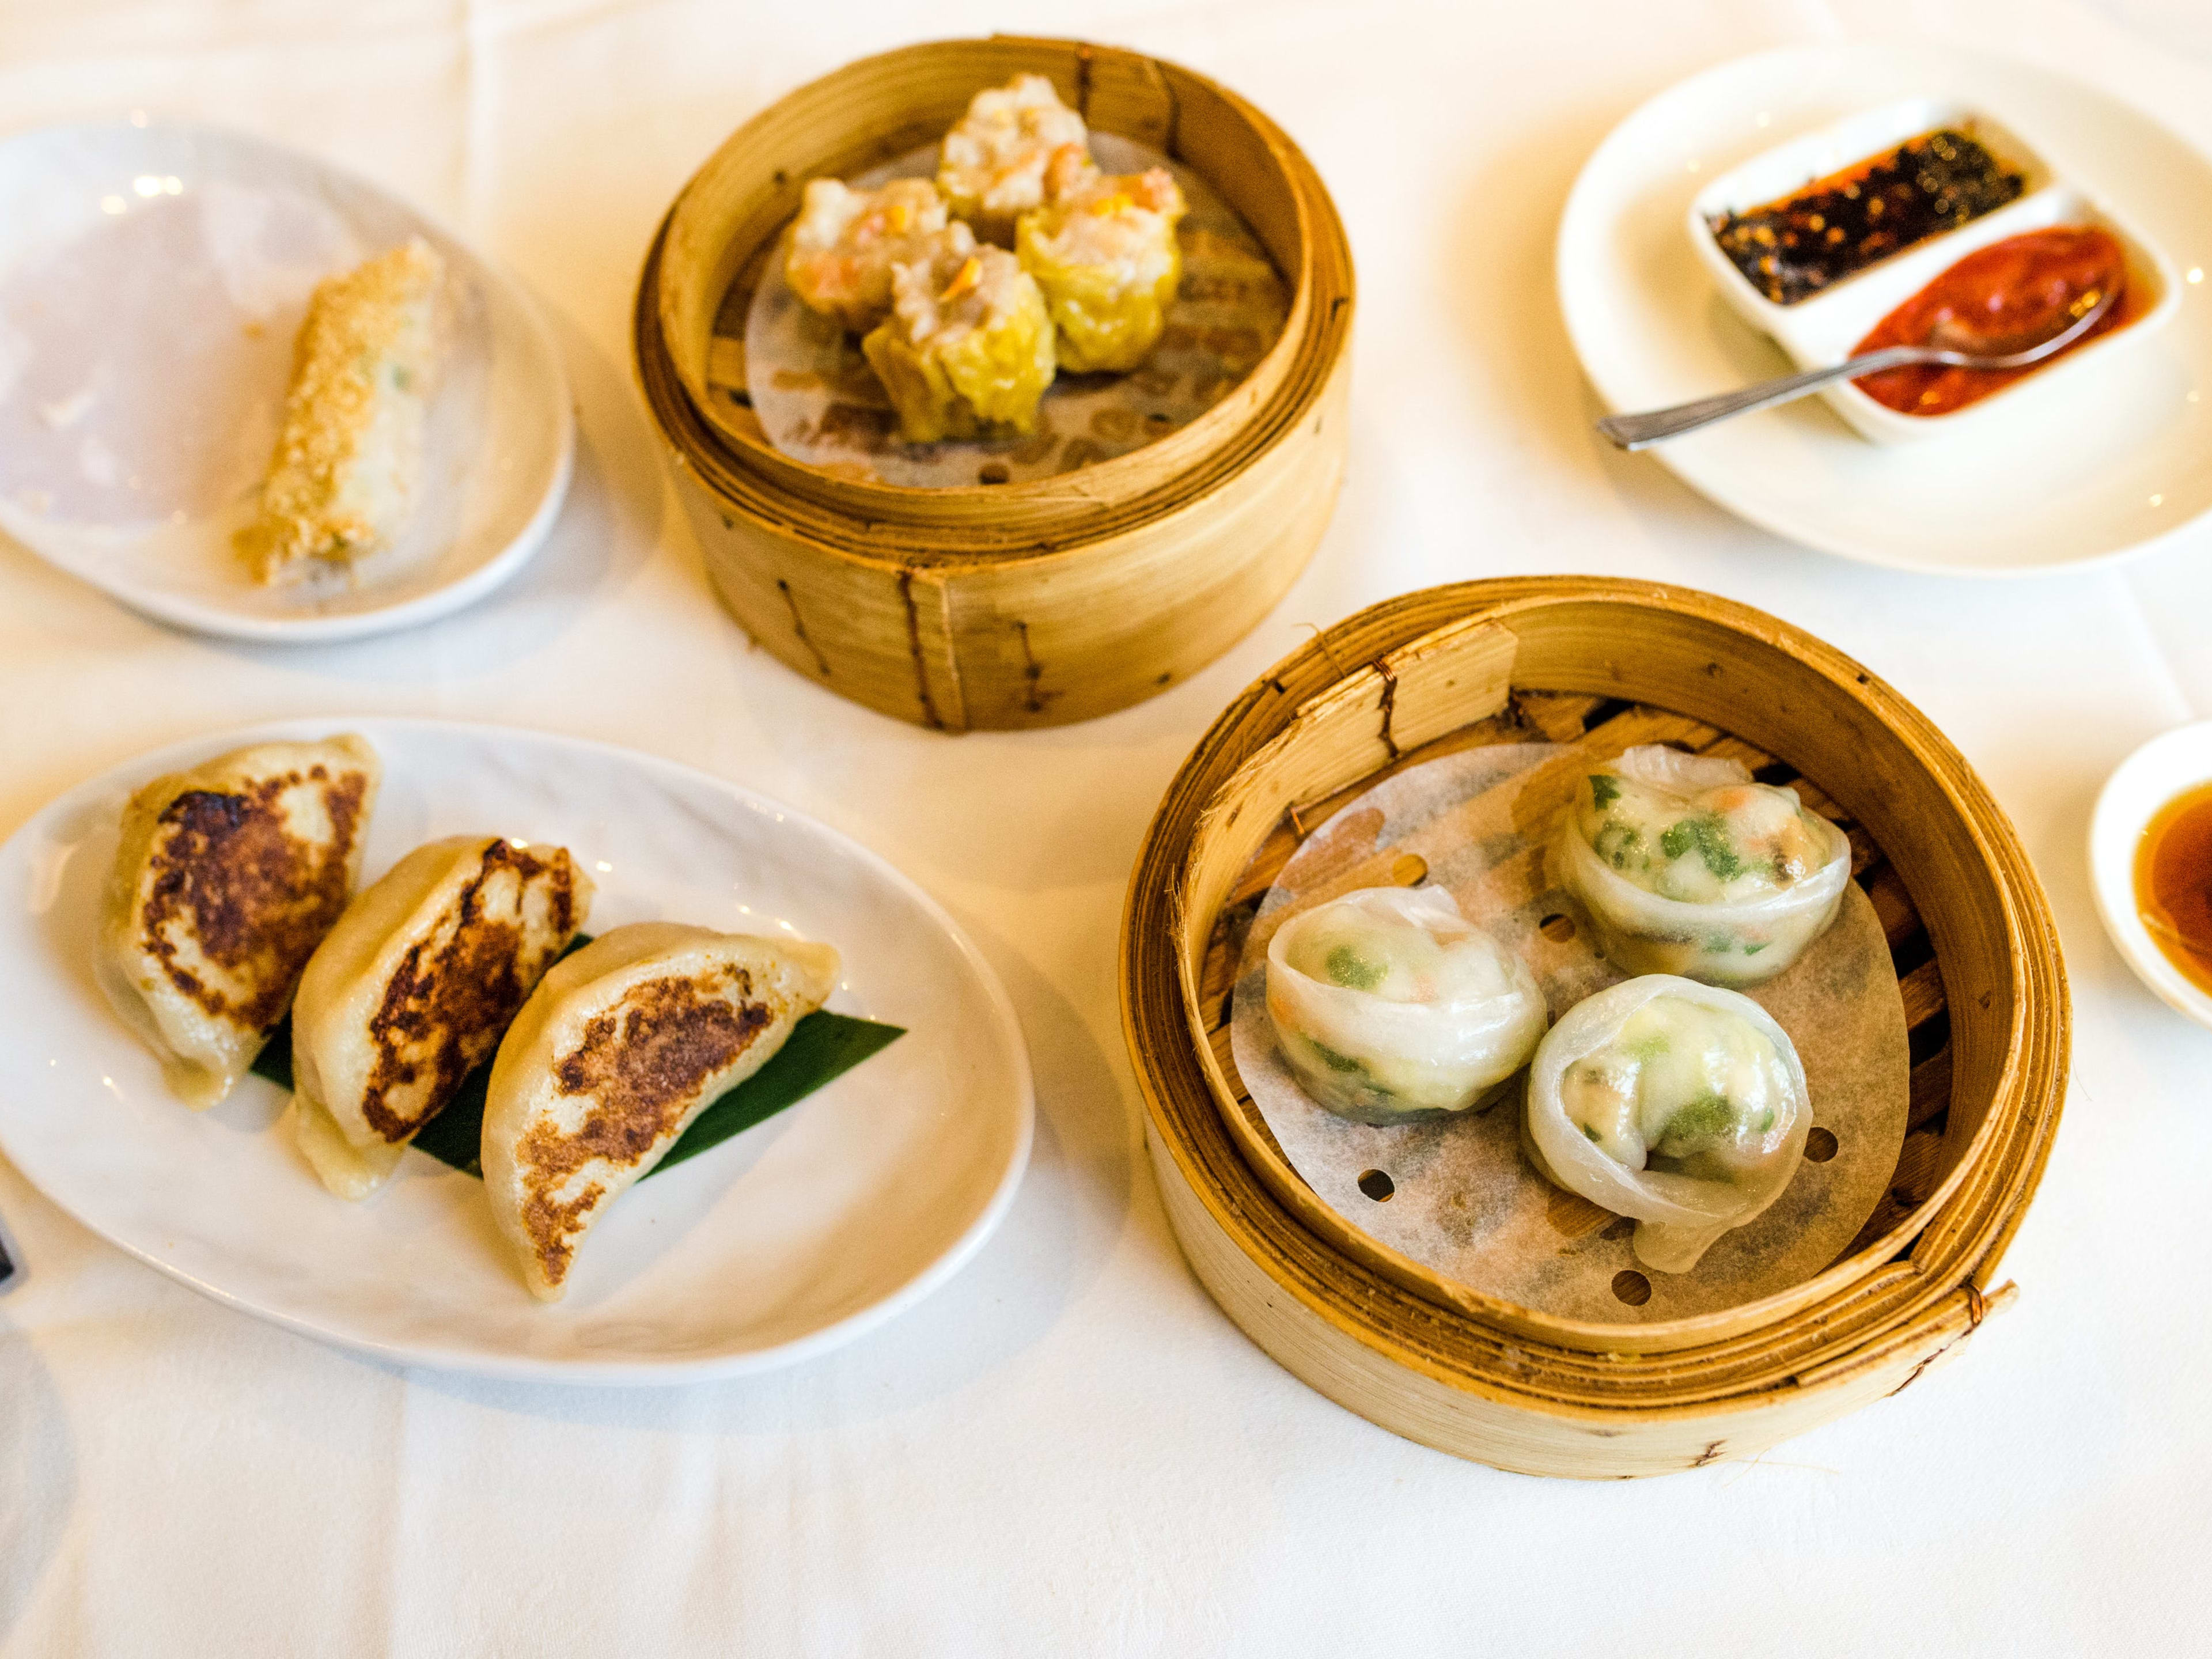 A spread of dishes from Royal China.